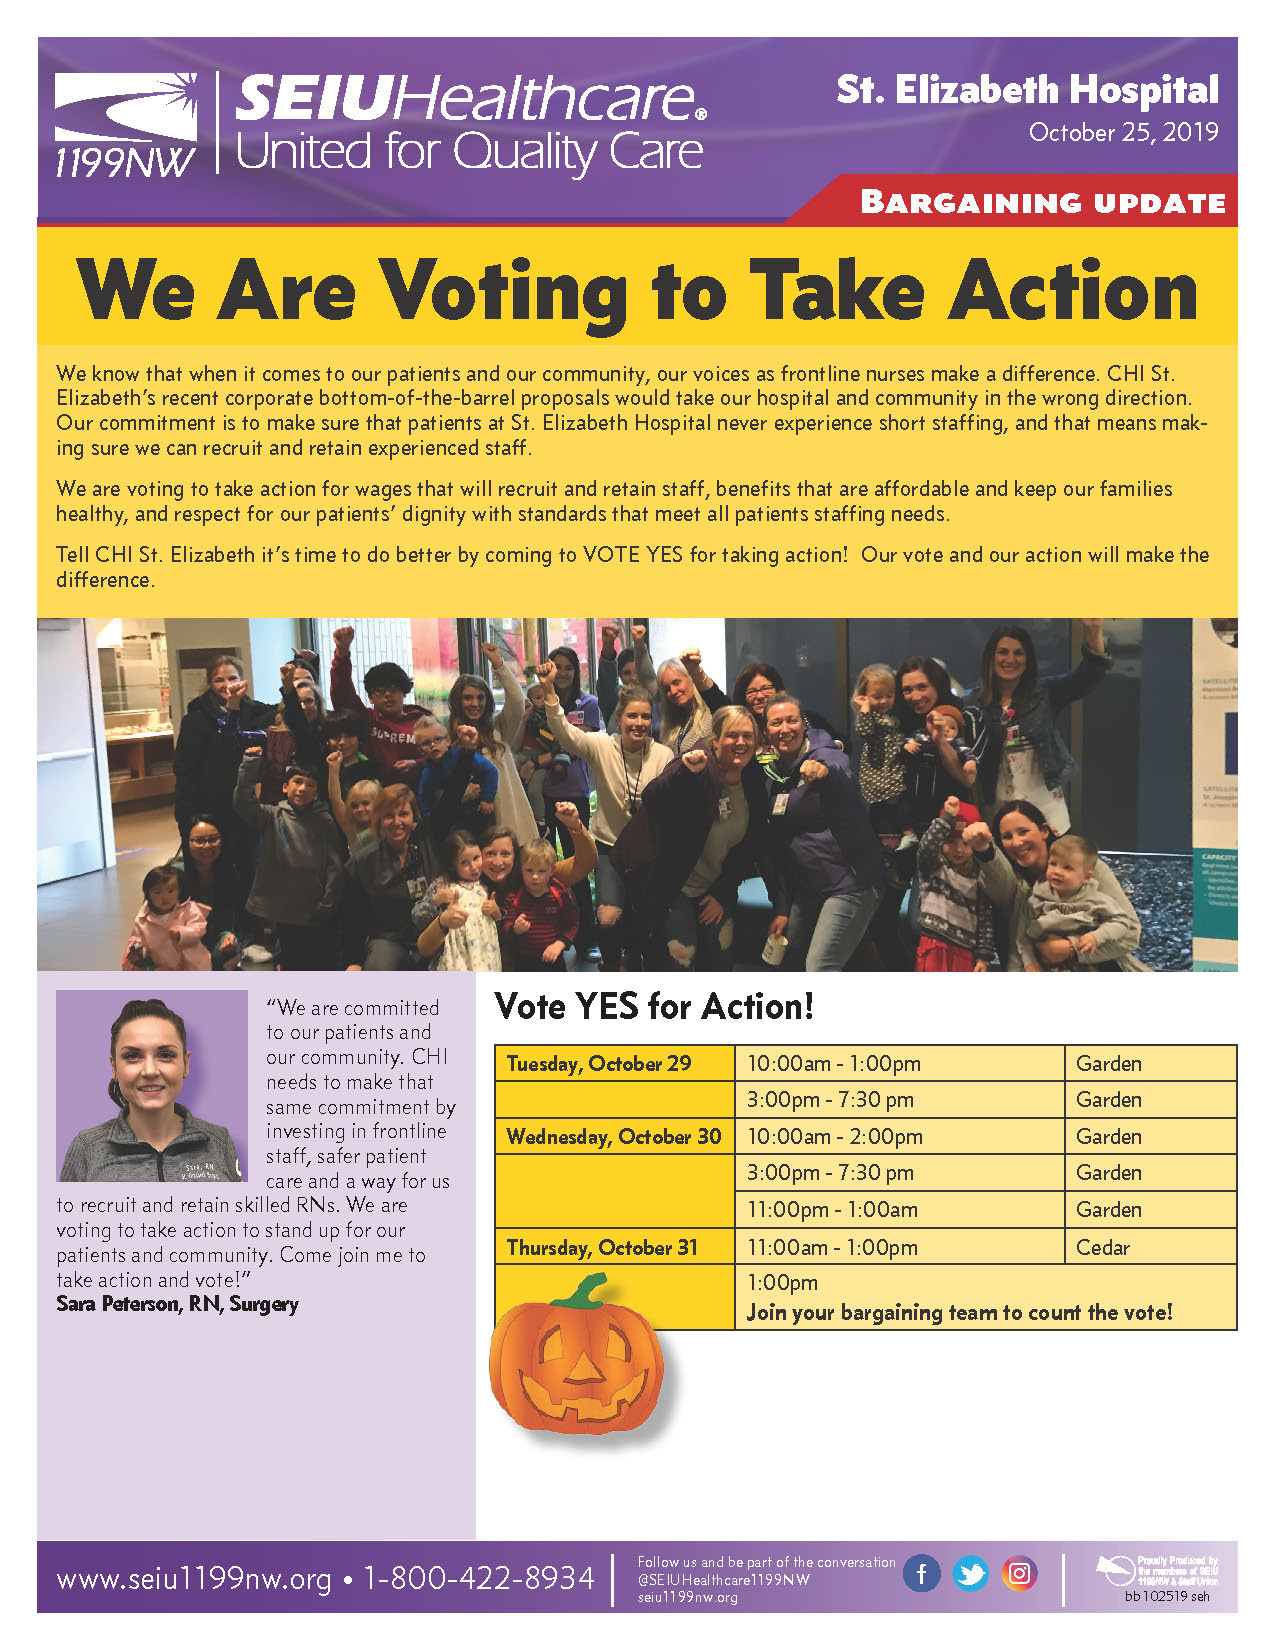 We Are Voting to Take Action